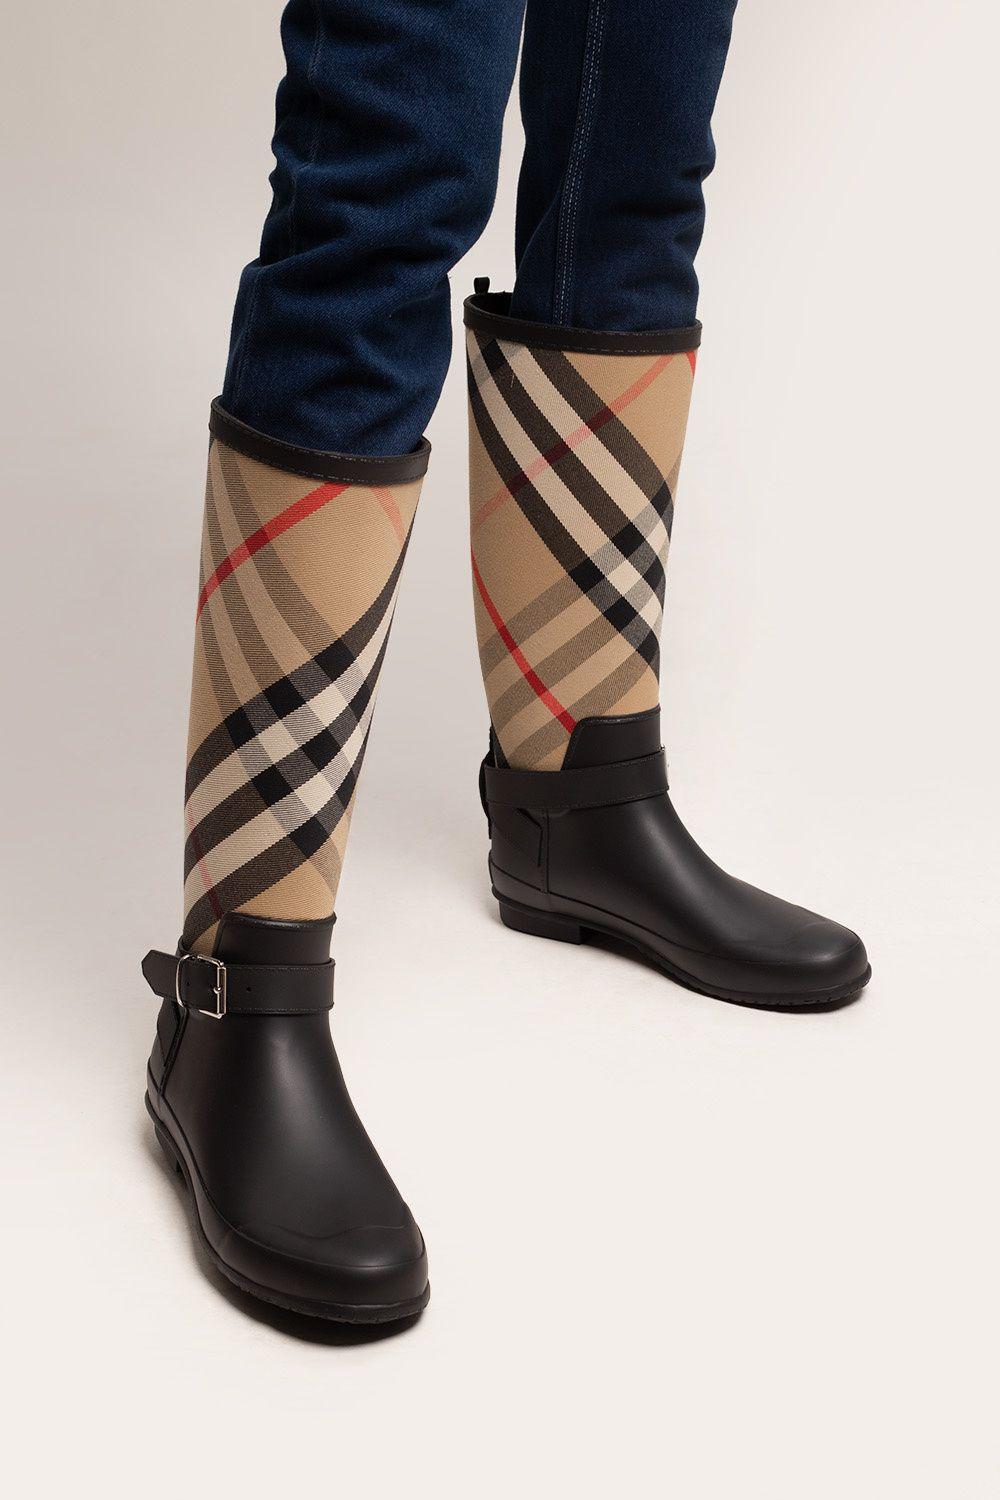 Karu Rytmisk offset Burberry 'house Check' Rain Boots in Natural | Lyst